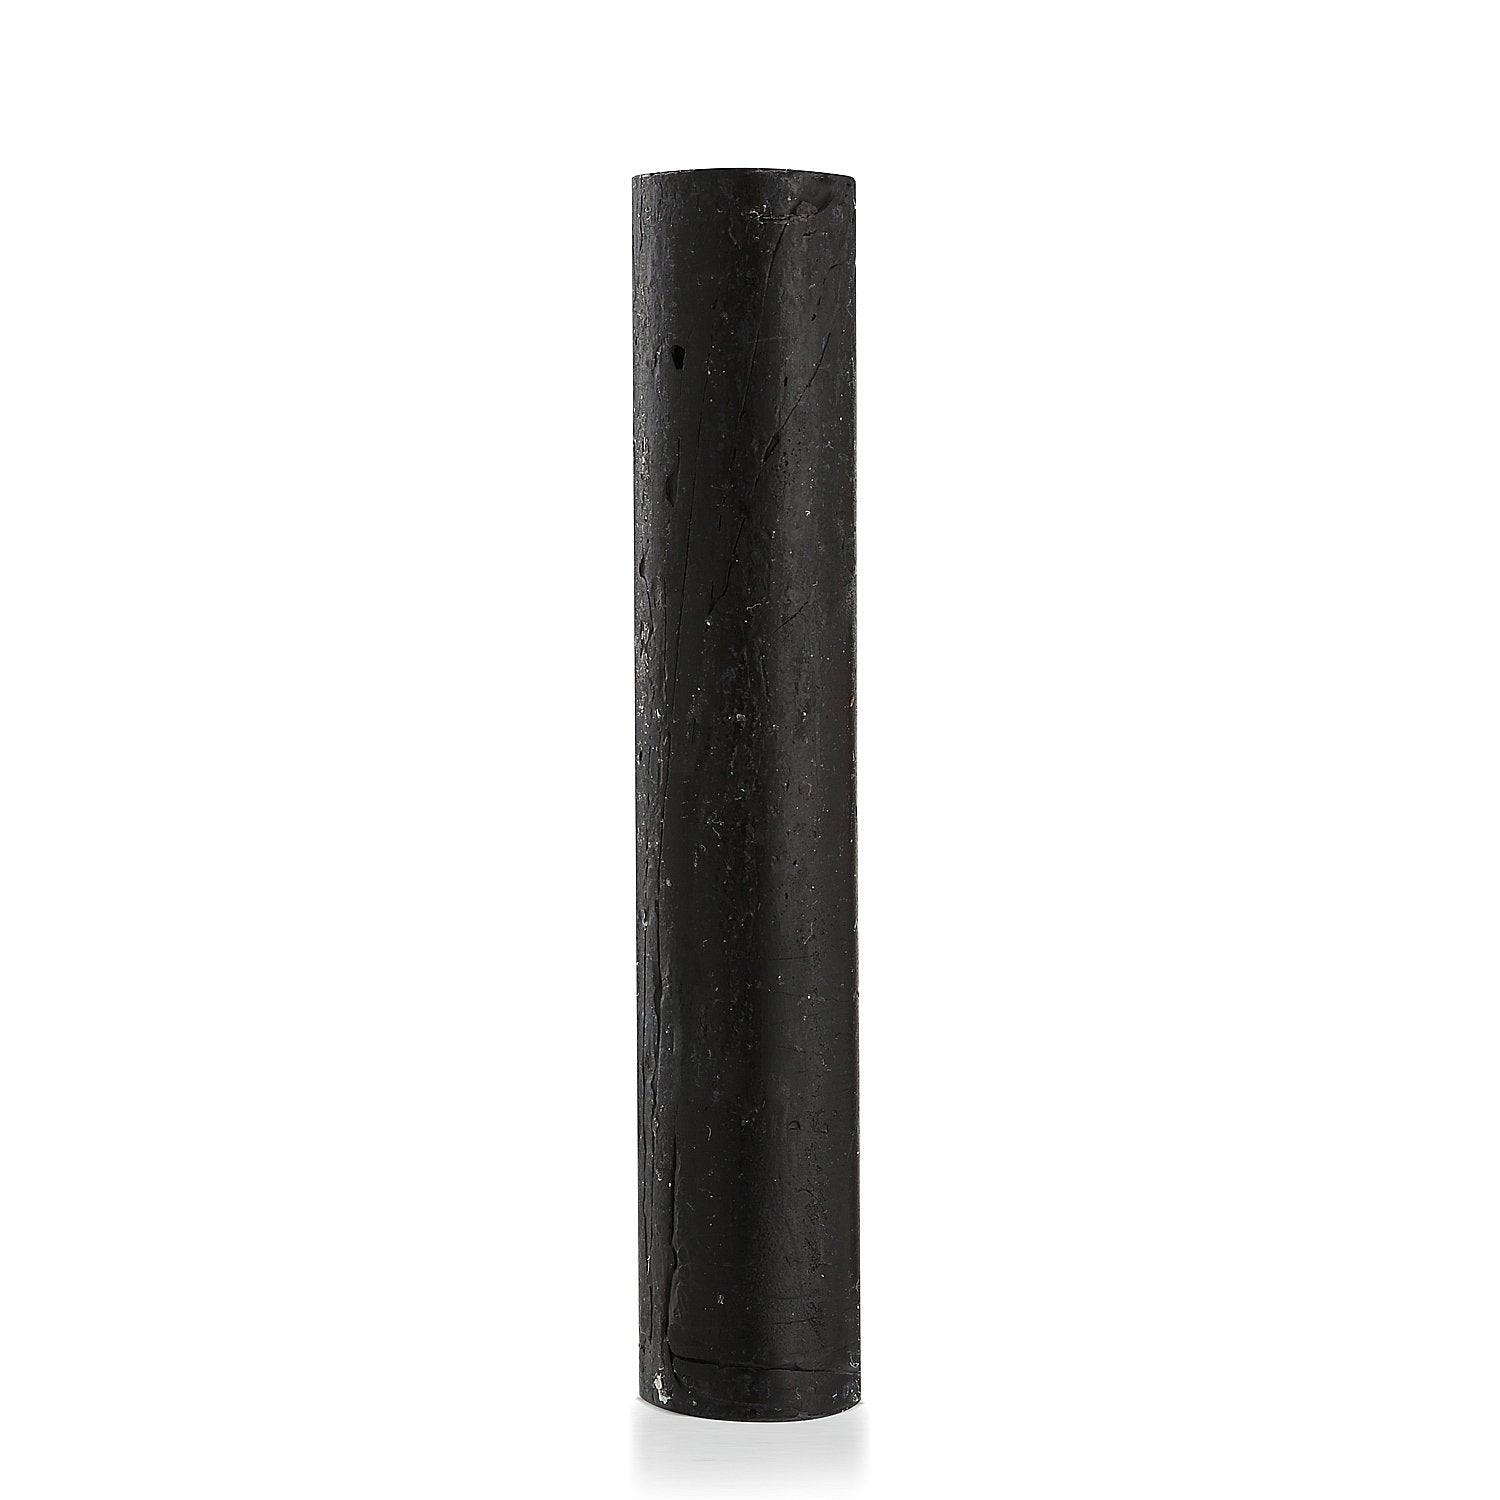 2Pce Black Beeswax Filler Sticks BFSBLACK2 by Gilly's